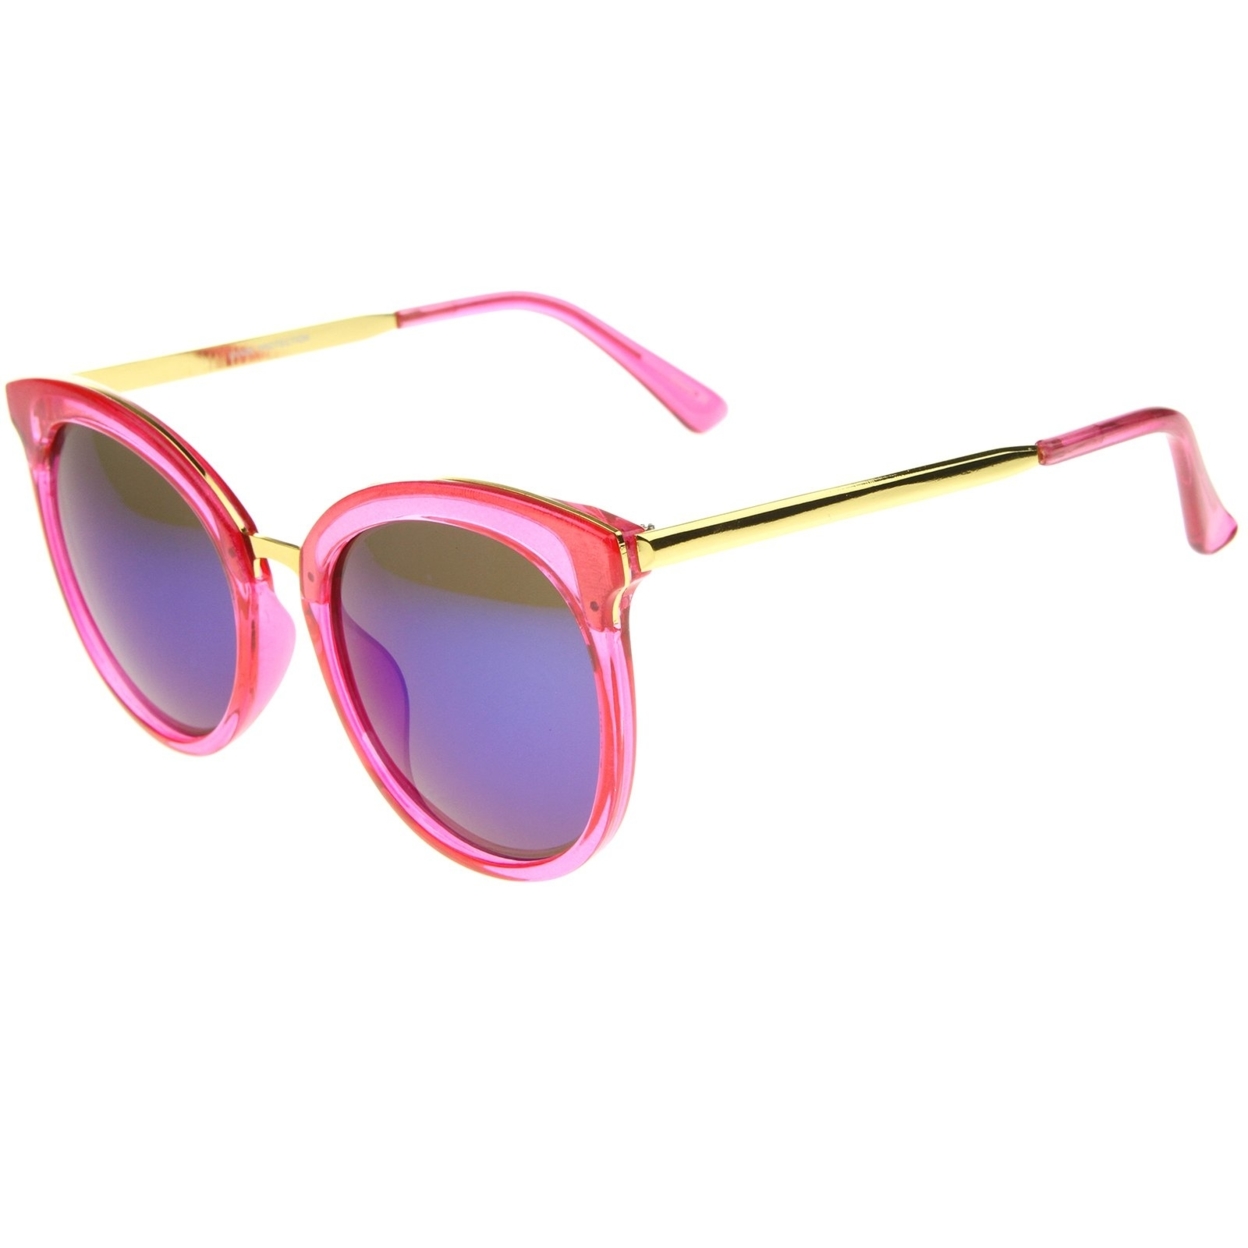 Womens Round Oversized Translucent High Temple Color Mirrored Lens Cat Eye Sunglasses - Pink-Gold / Blue Mirror